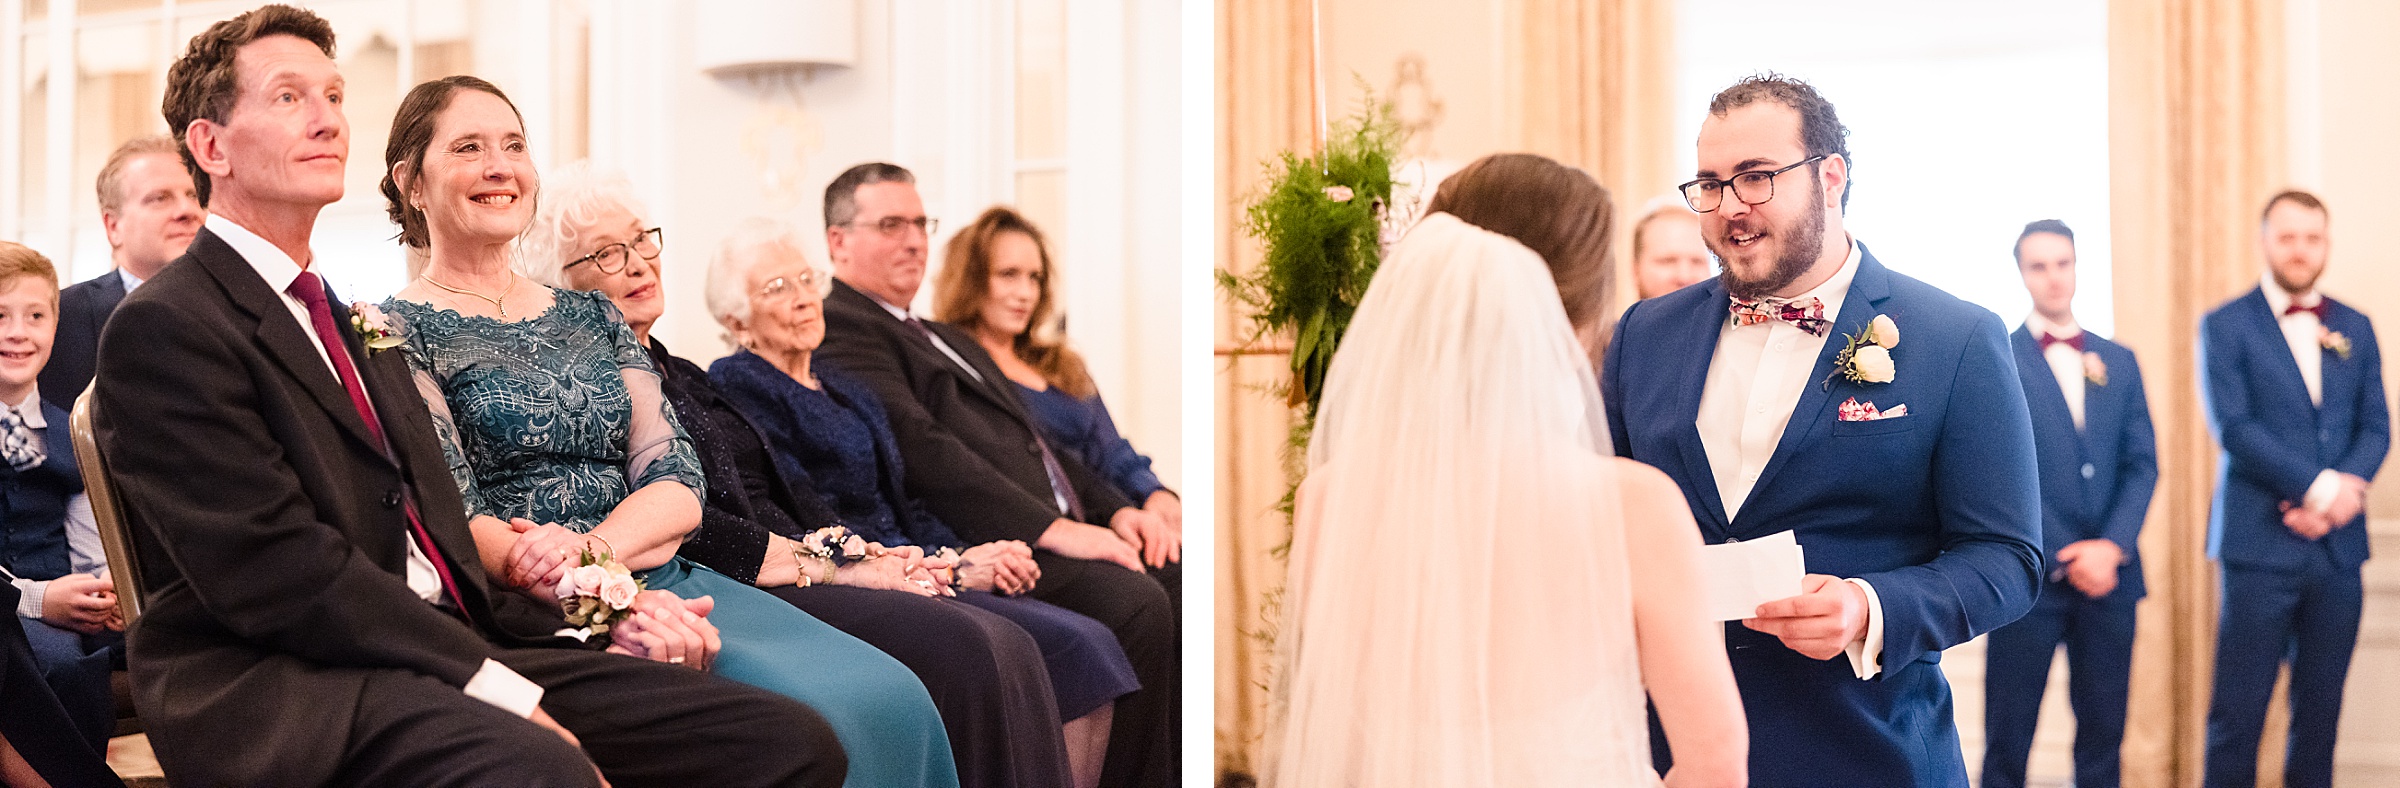 Family watches bride and groom during a wedding ceremony at the Hotel Pere Marquette in Peoria, Illinois.